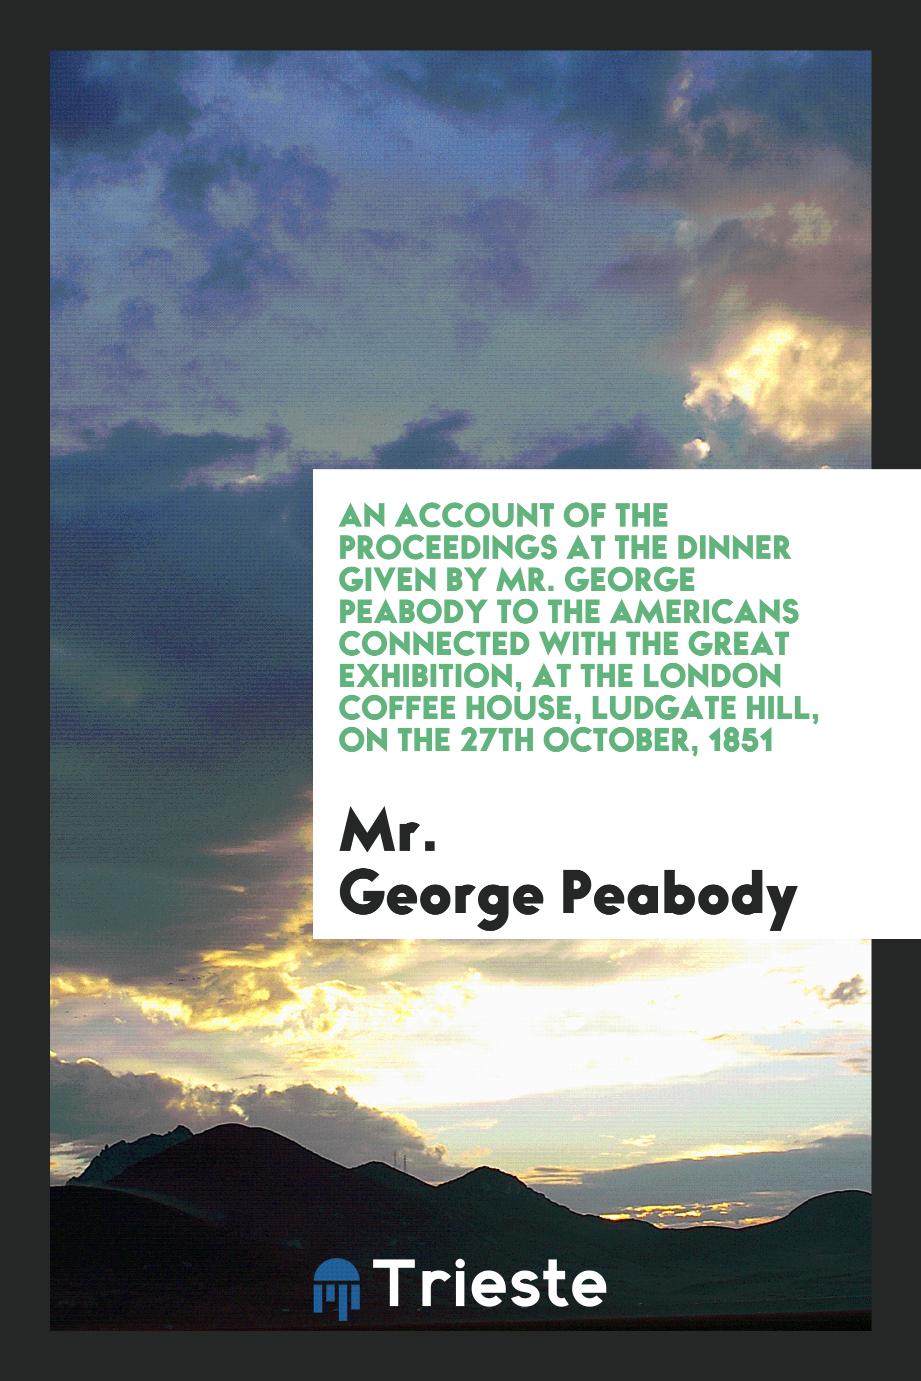 An Account of the Proceedings at the Dinner Given by Mr. George Peabody to the Americans Connected with the Great Exhibition, at the London Coffee House, Ludgate Hill, on the 27th October, 1851